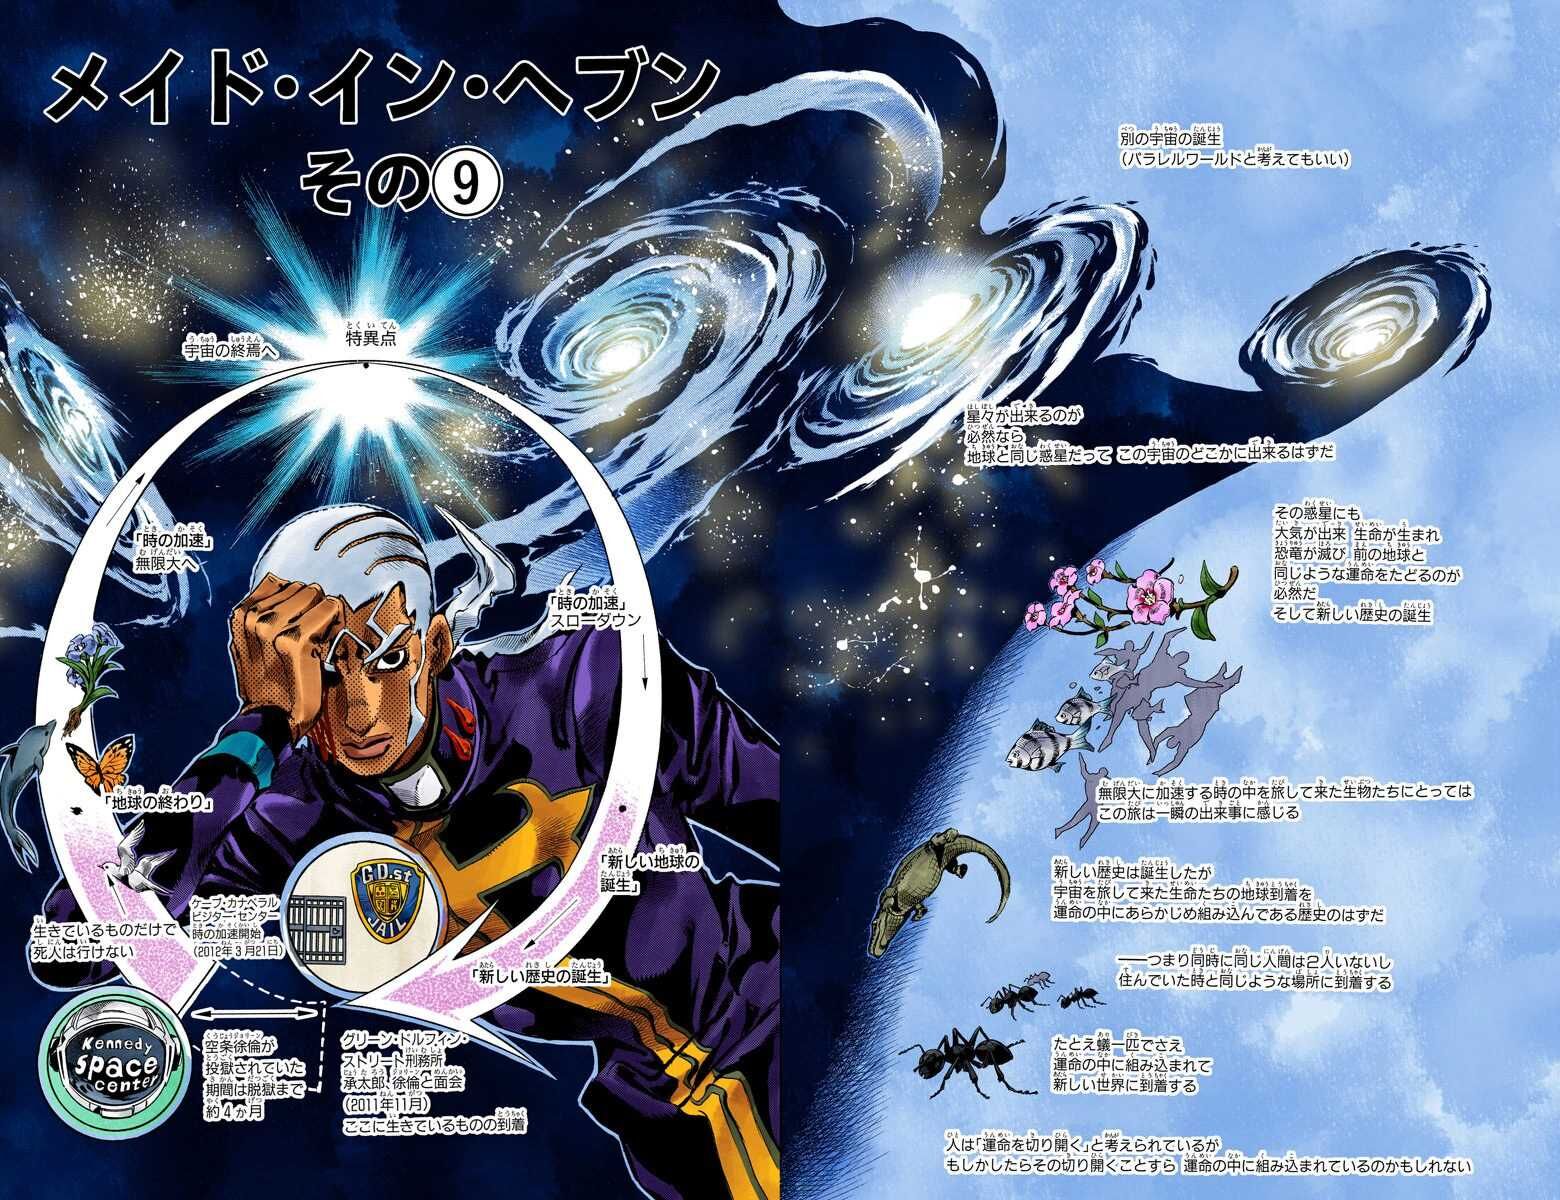 Funny Valentine(D4C) Vs. Enrico Pucci(MiH, C-Moon, Ws), Who Would